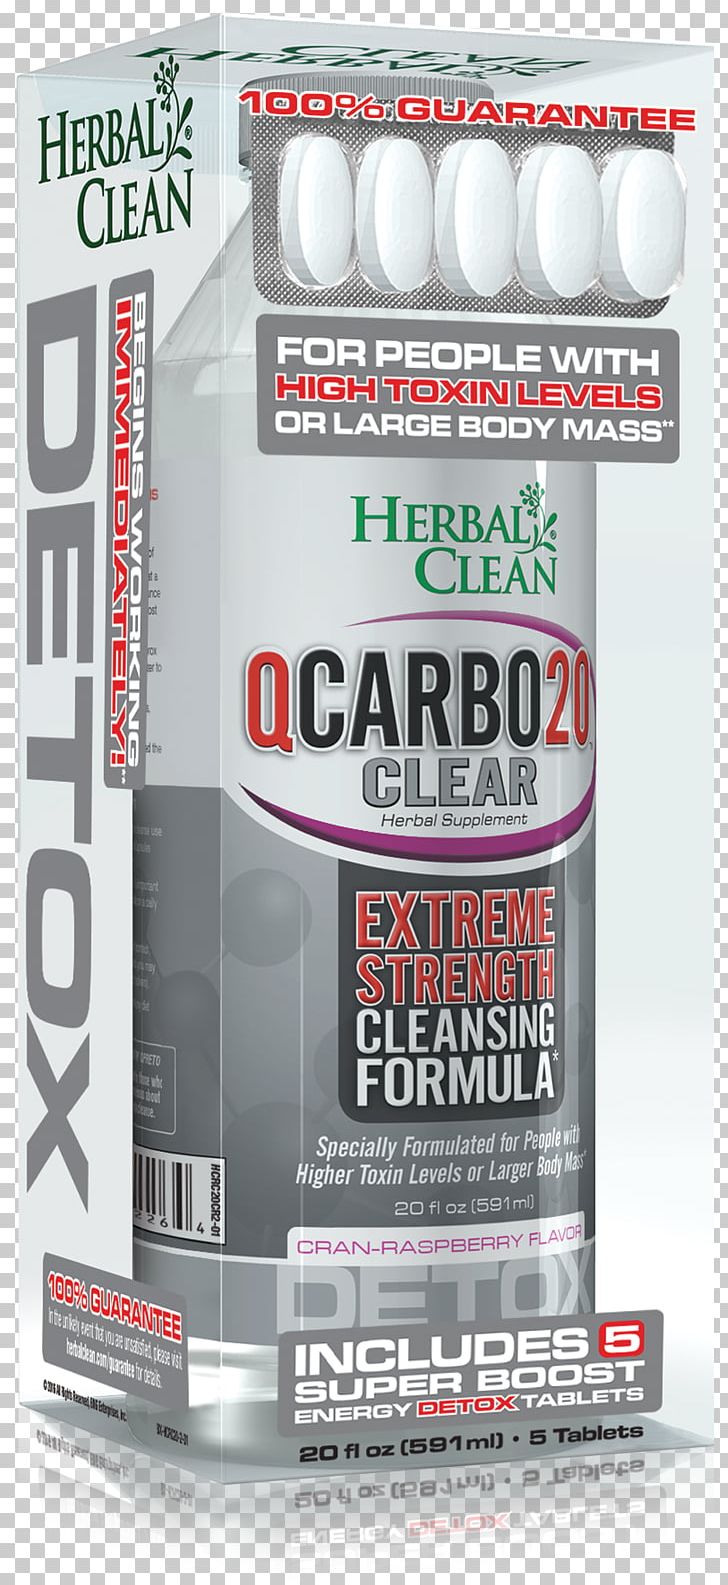 HERBAL CLEAN DETOX Q Carbo Liquid Grape 16 OZ BNG Enterprises Herbal Clean QCarbo20 Clear Extreme Strength Cleansing Formula Lemon-Lime Flavor Detoxification Drink Cleanser PNG, Clipart, Brand, Cleanser, Detoxification, Drink, Extract Free PNG Download